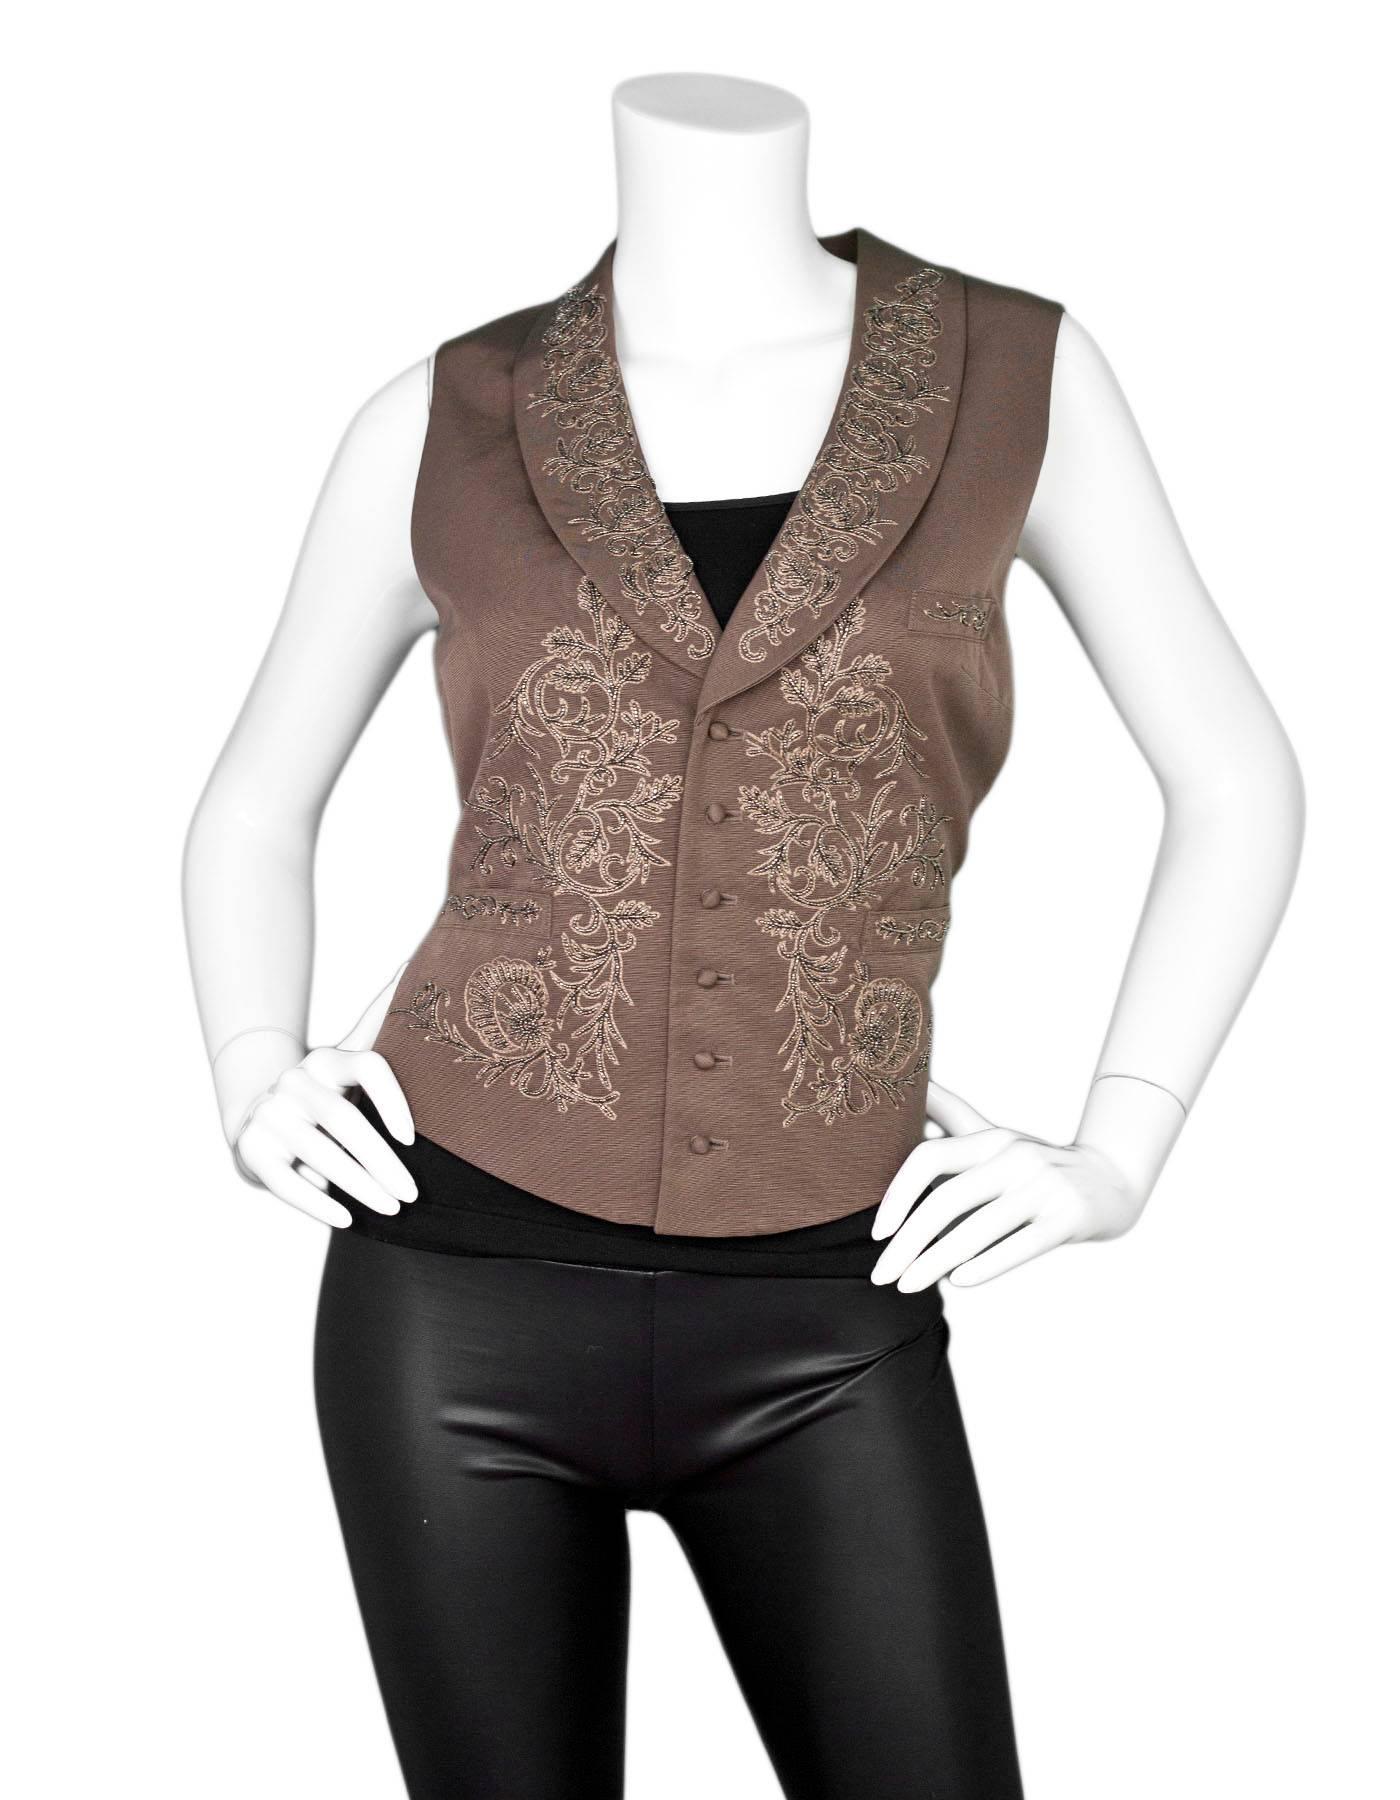 Ralph Lauren Brown Beaded Vest Sz 8

Made In: China
Color: Brown
Composition: 74% cotton, 26% silk
Lining: Brown textile
Closure/Opening: Front button closure
Exterior Pockets: Slit pockets
Overall Condition: Excellent pre-owned condition
Marked